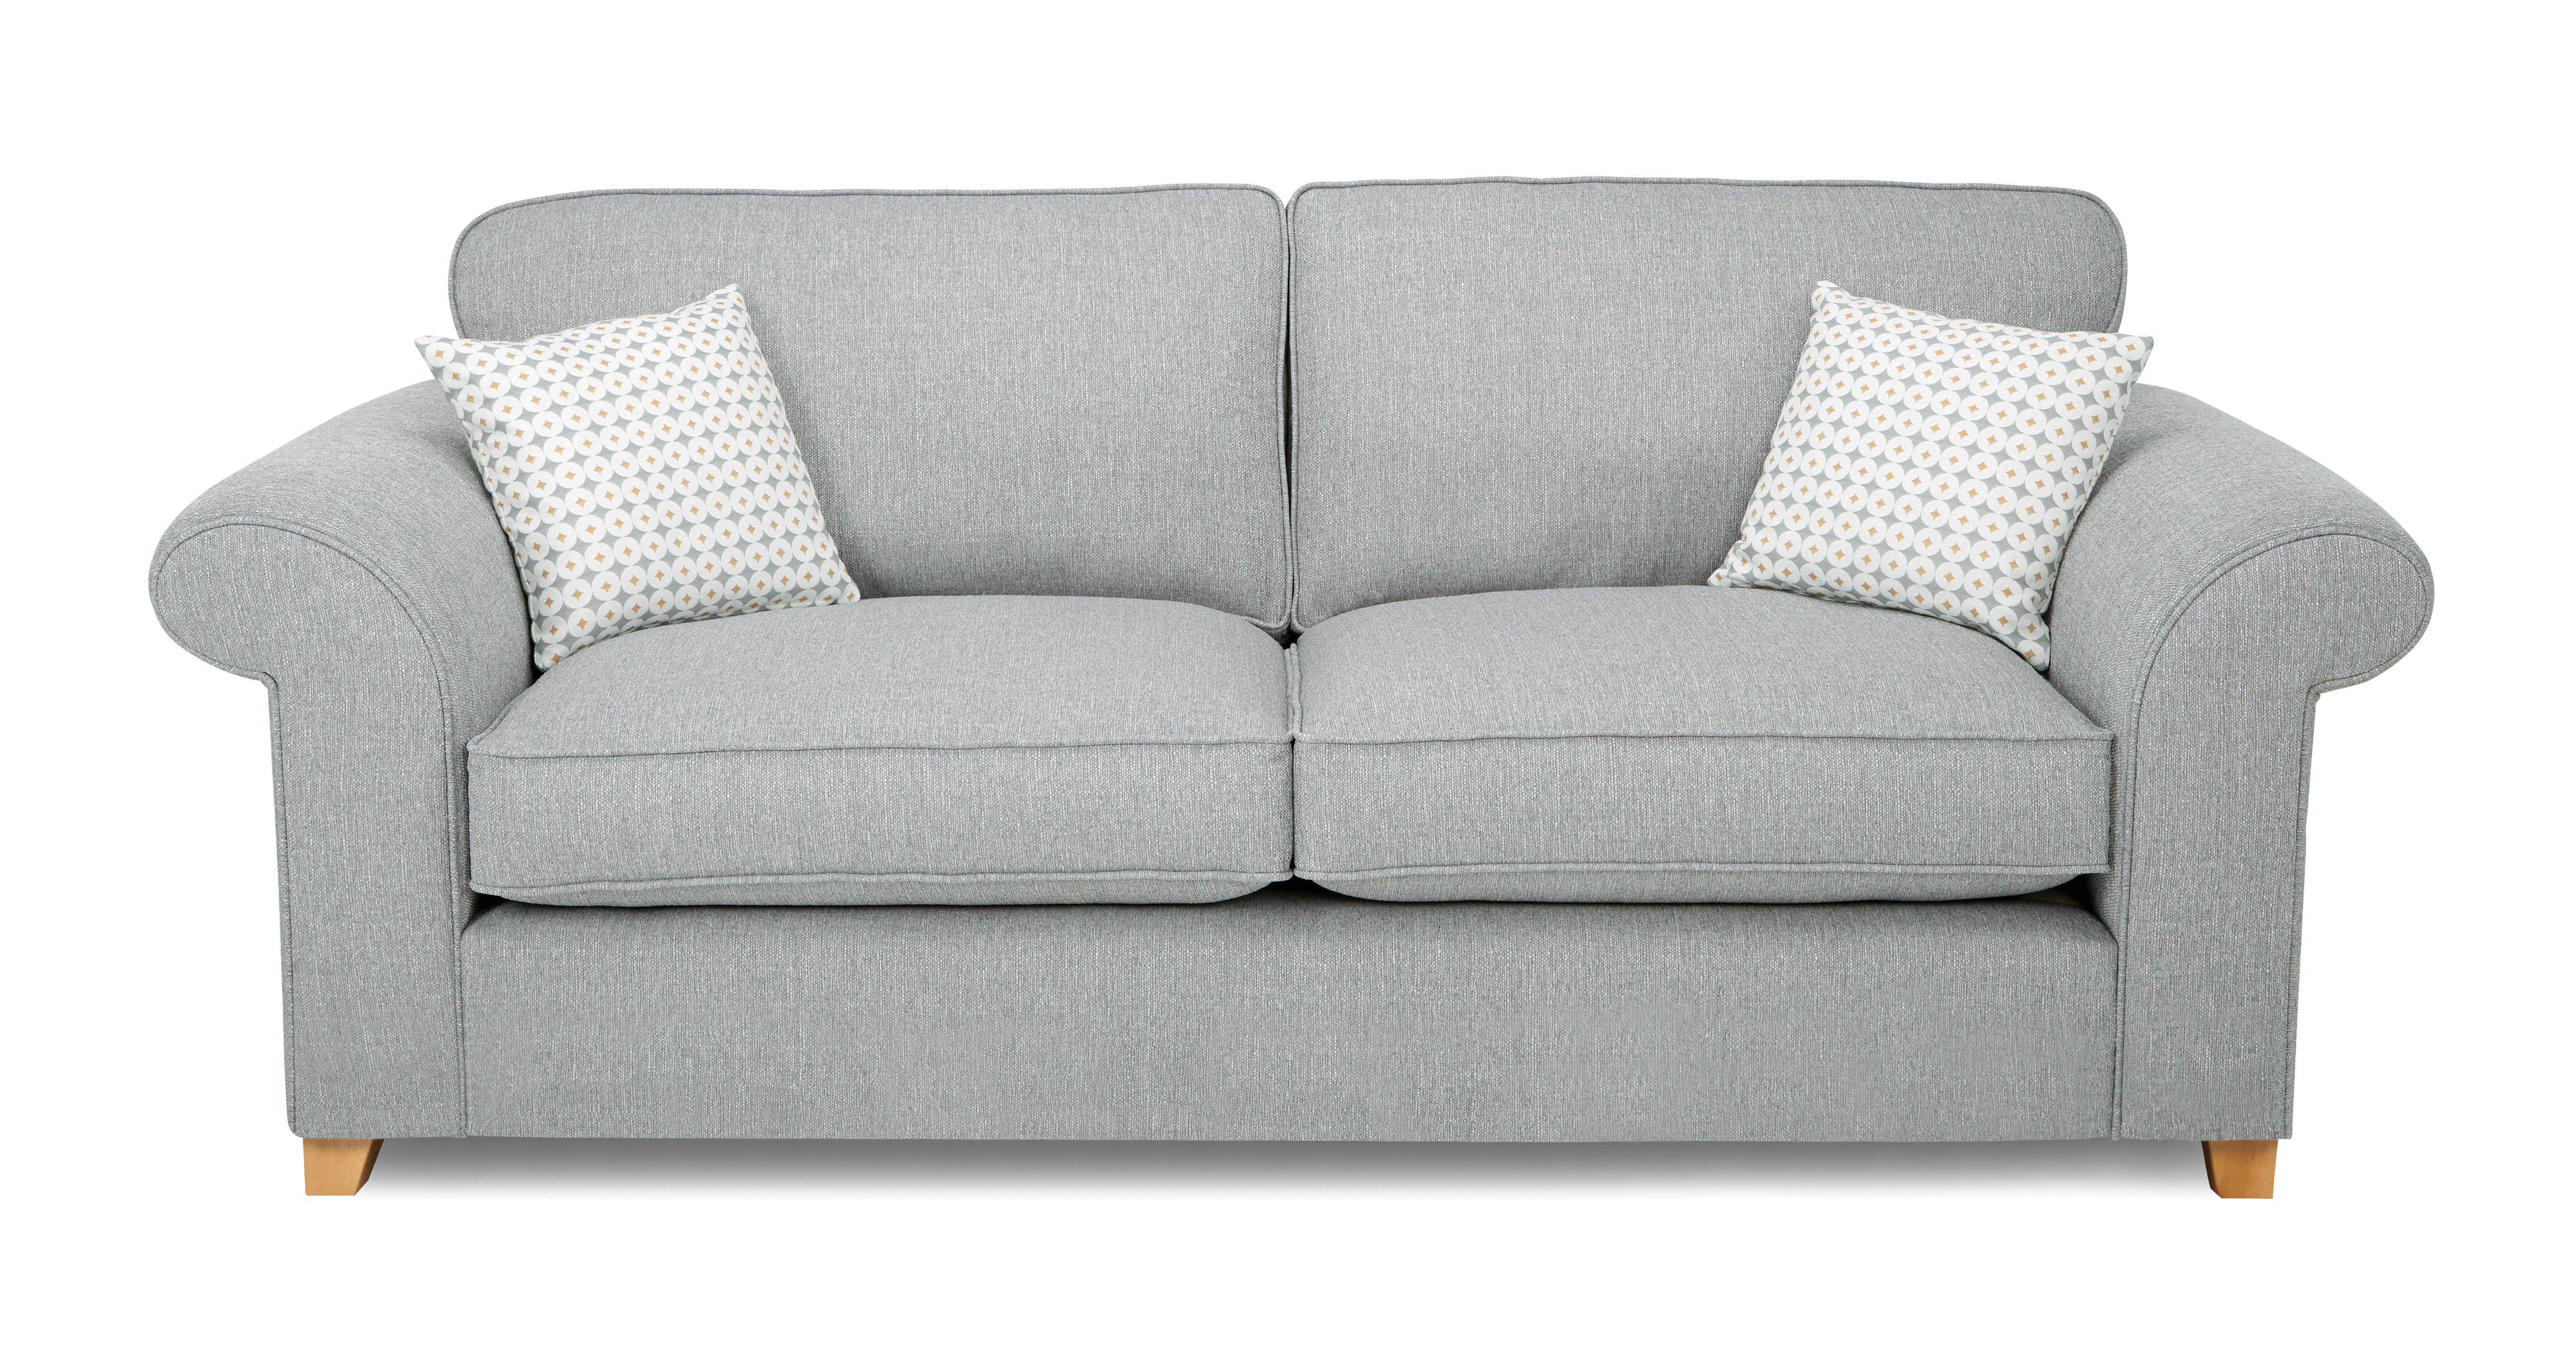 dfs angelic 3 seater sofa bed